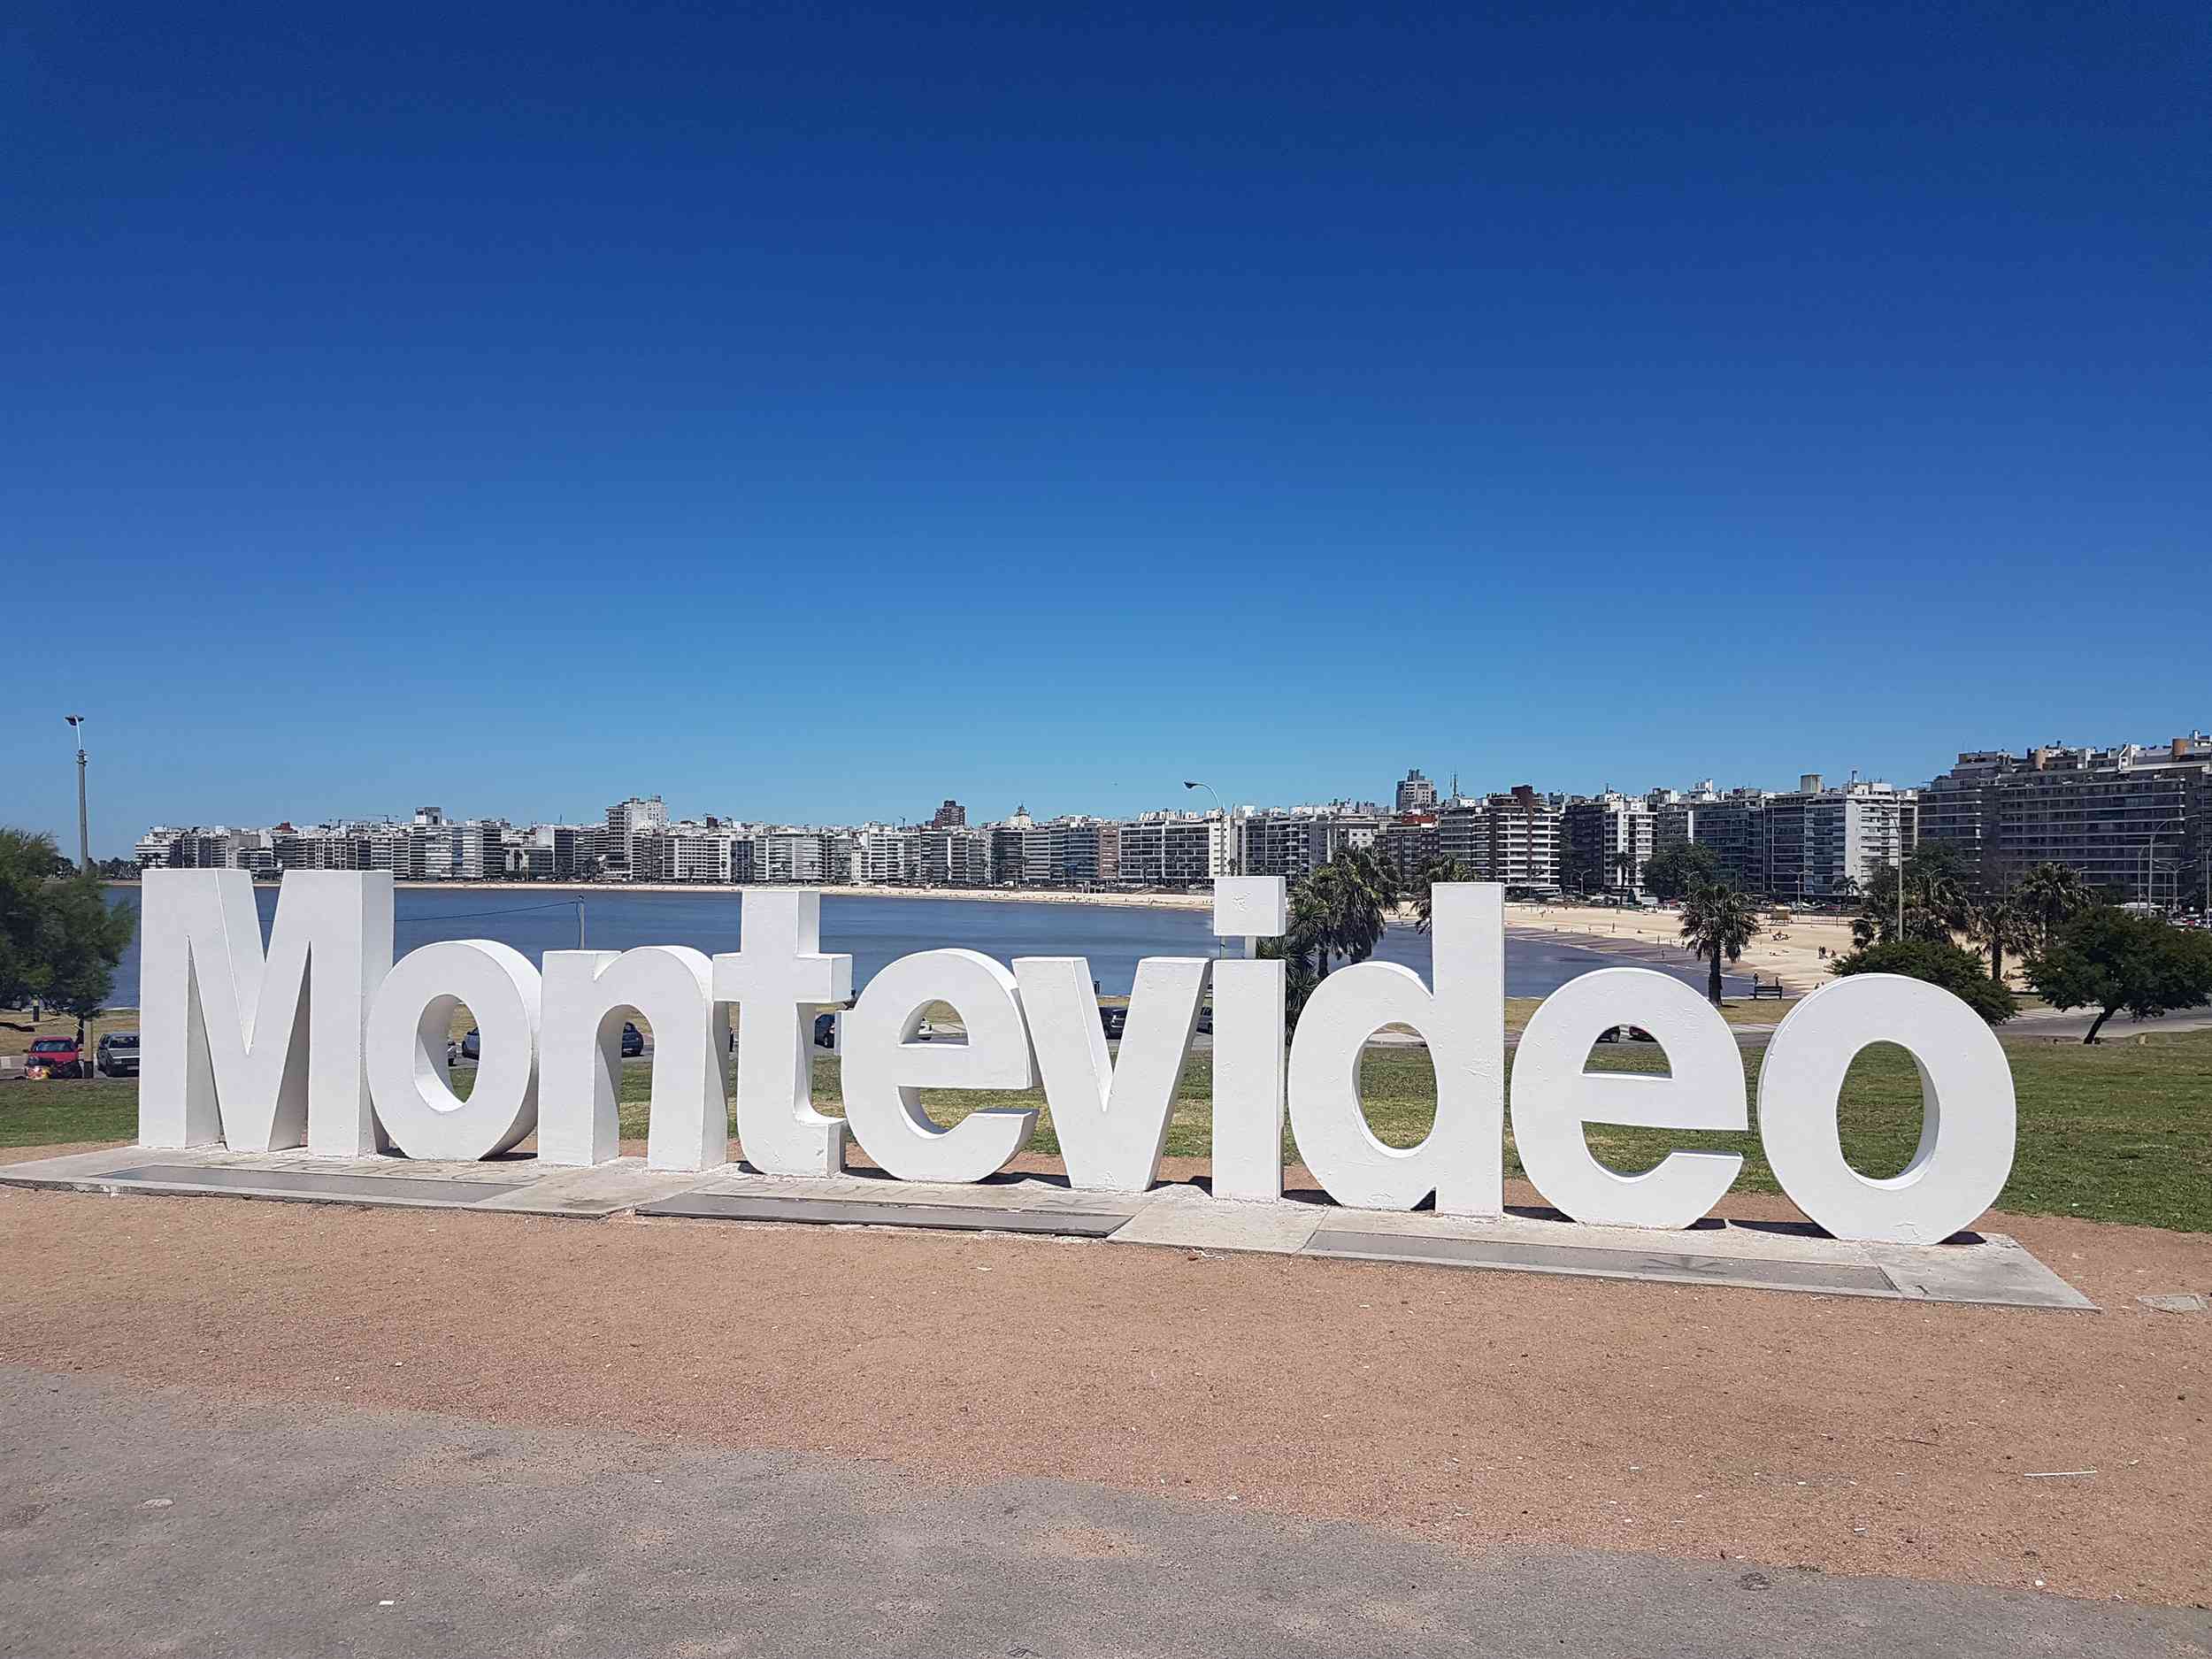 Is Montevideo Tap Water Safe To Drink? Tap water & safety quality